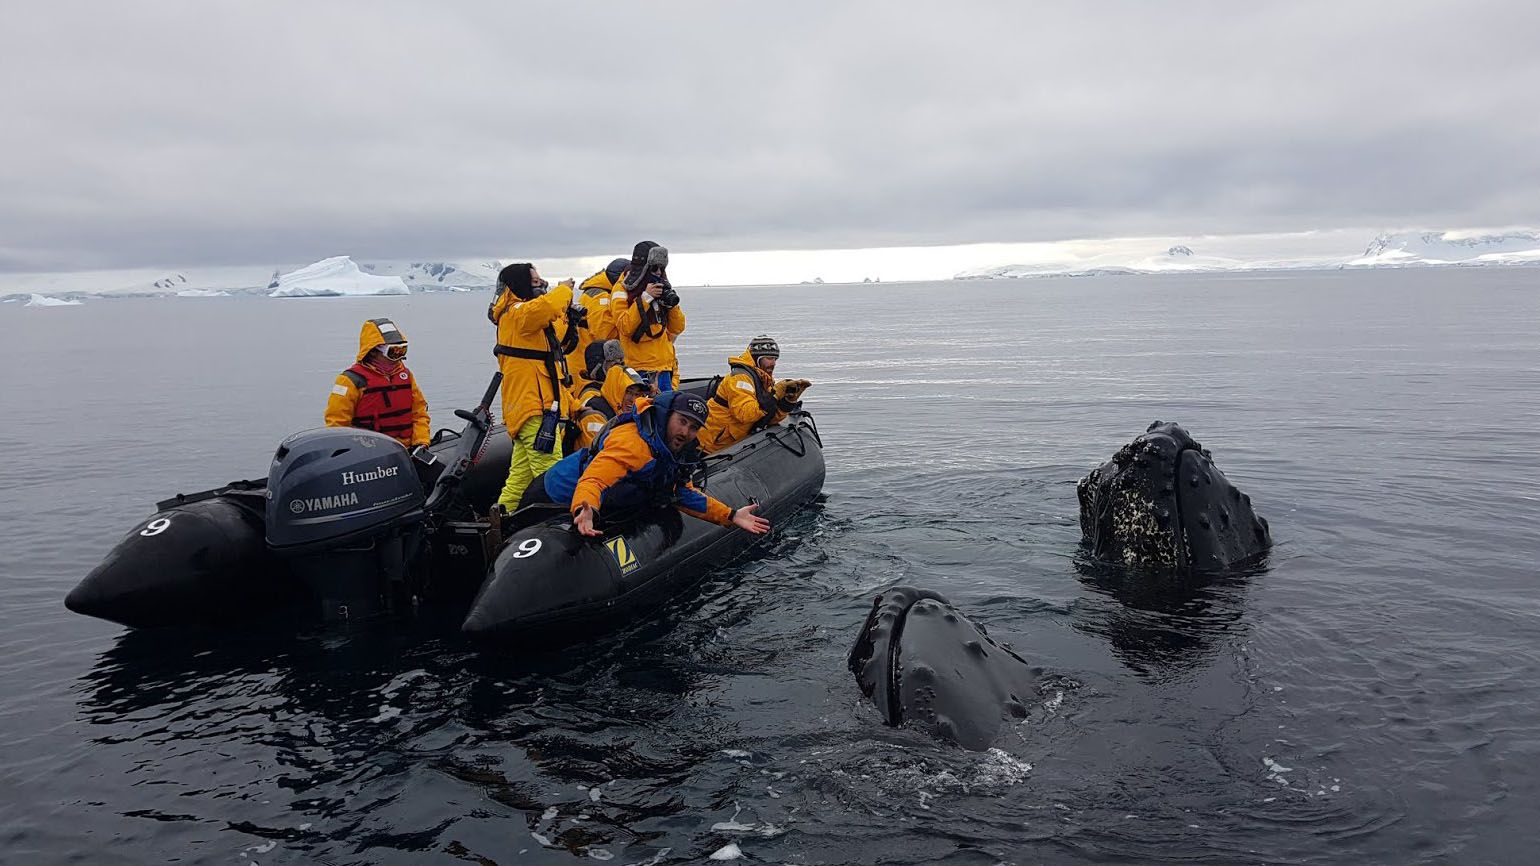 Brett and his team touch the bumpy surface of a whale.